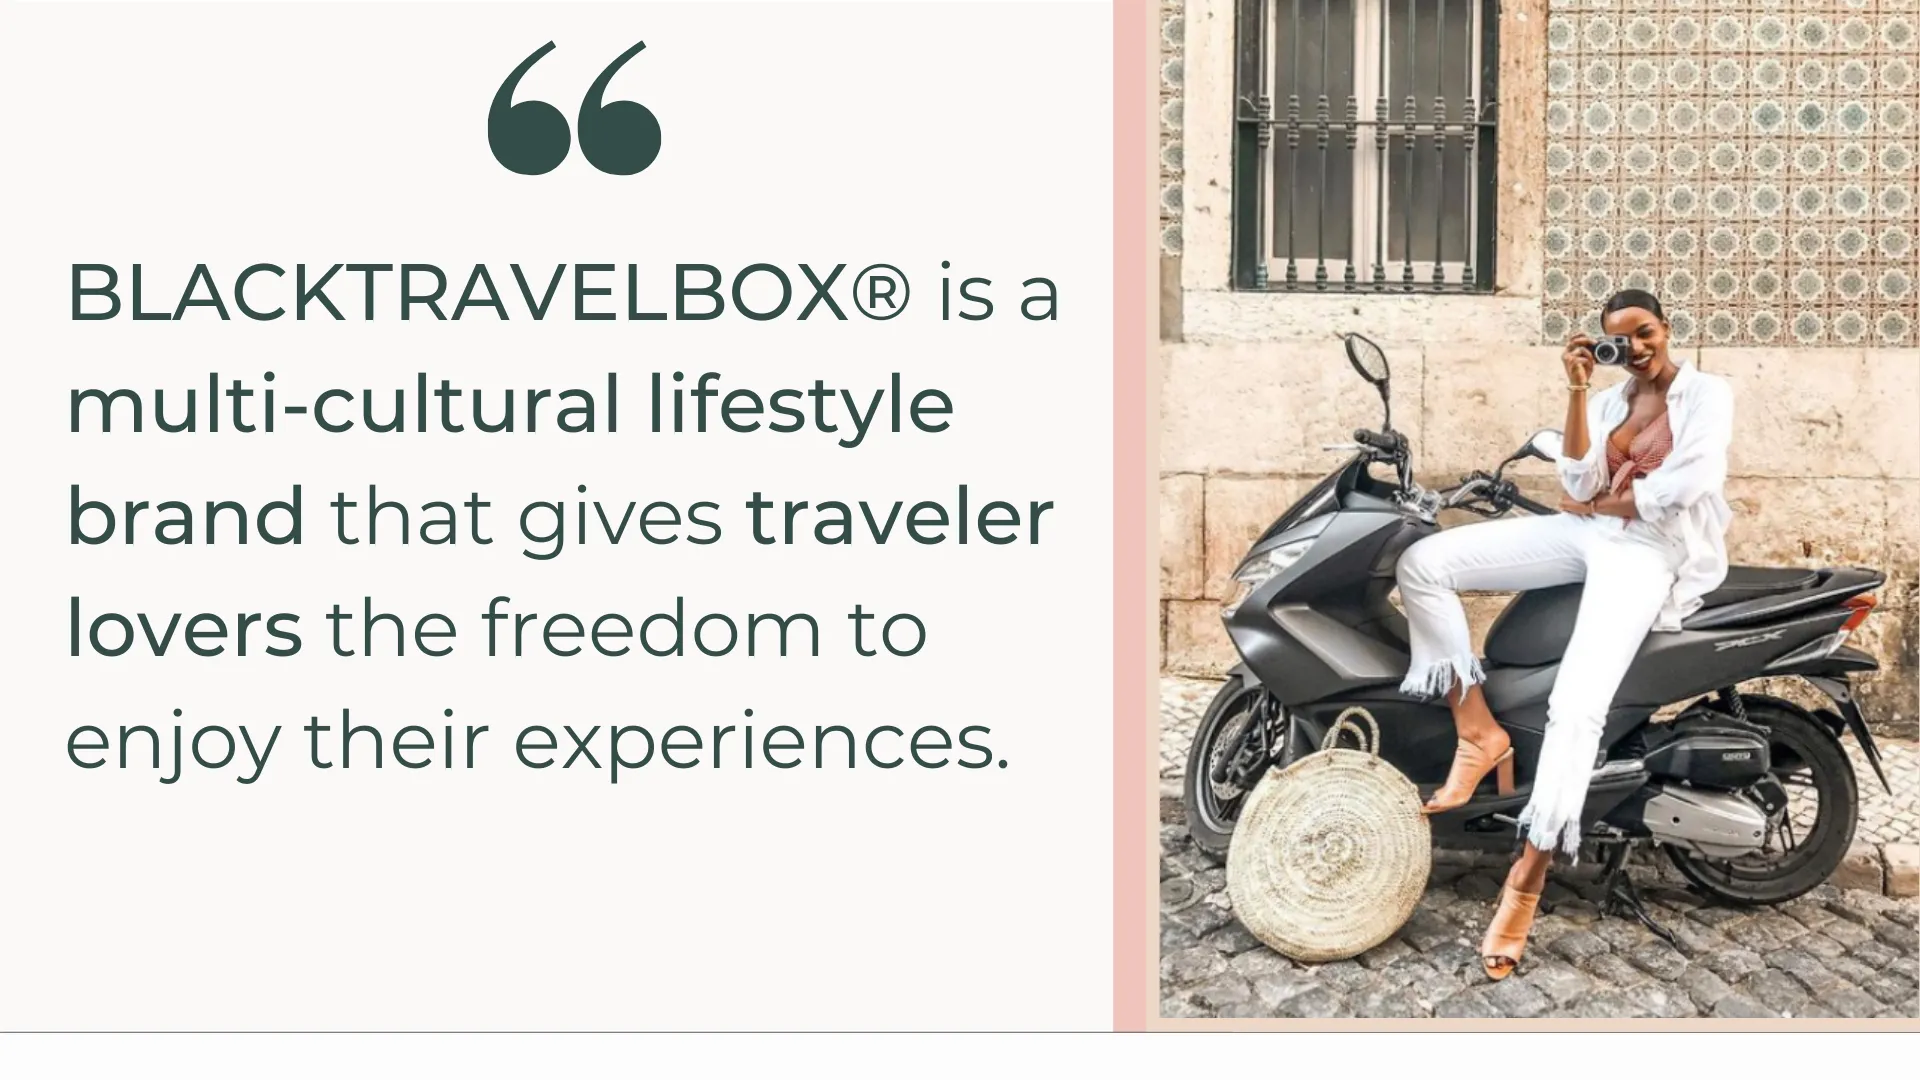 BLACKTRAVELBOX® is a multi-cultural lifestyle brand that gives traveler lovers the freedom to enjoy their experiences.